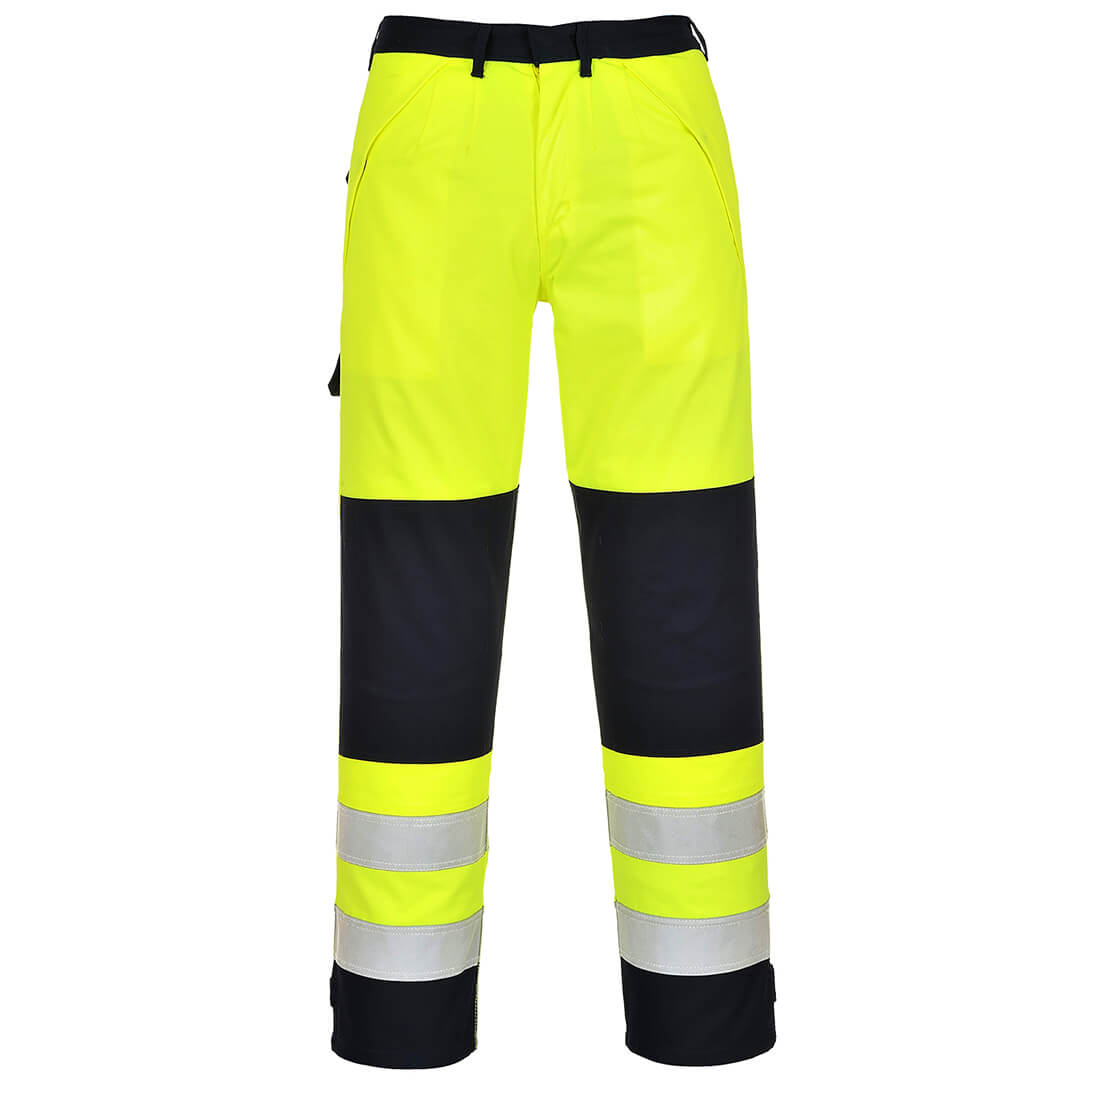 Image of Biz Flame Hi Vis Multi-Norm Flame Resistant Trousers Yellow / Navy 3XL